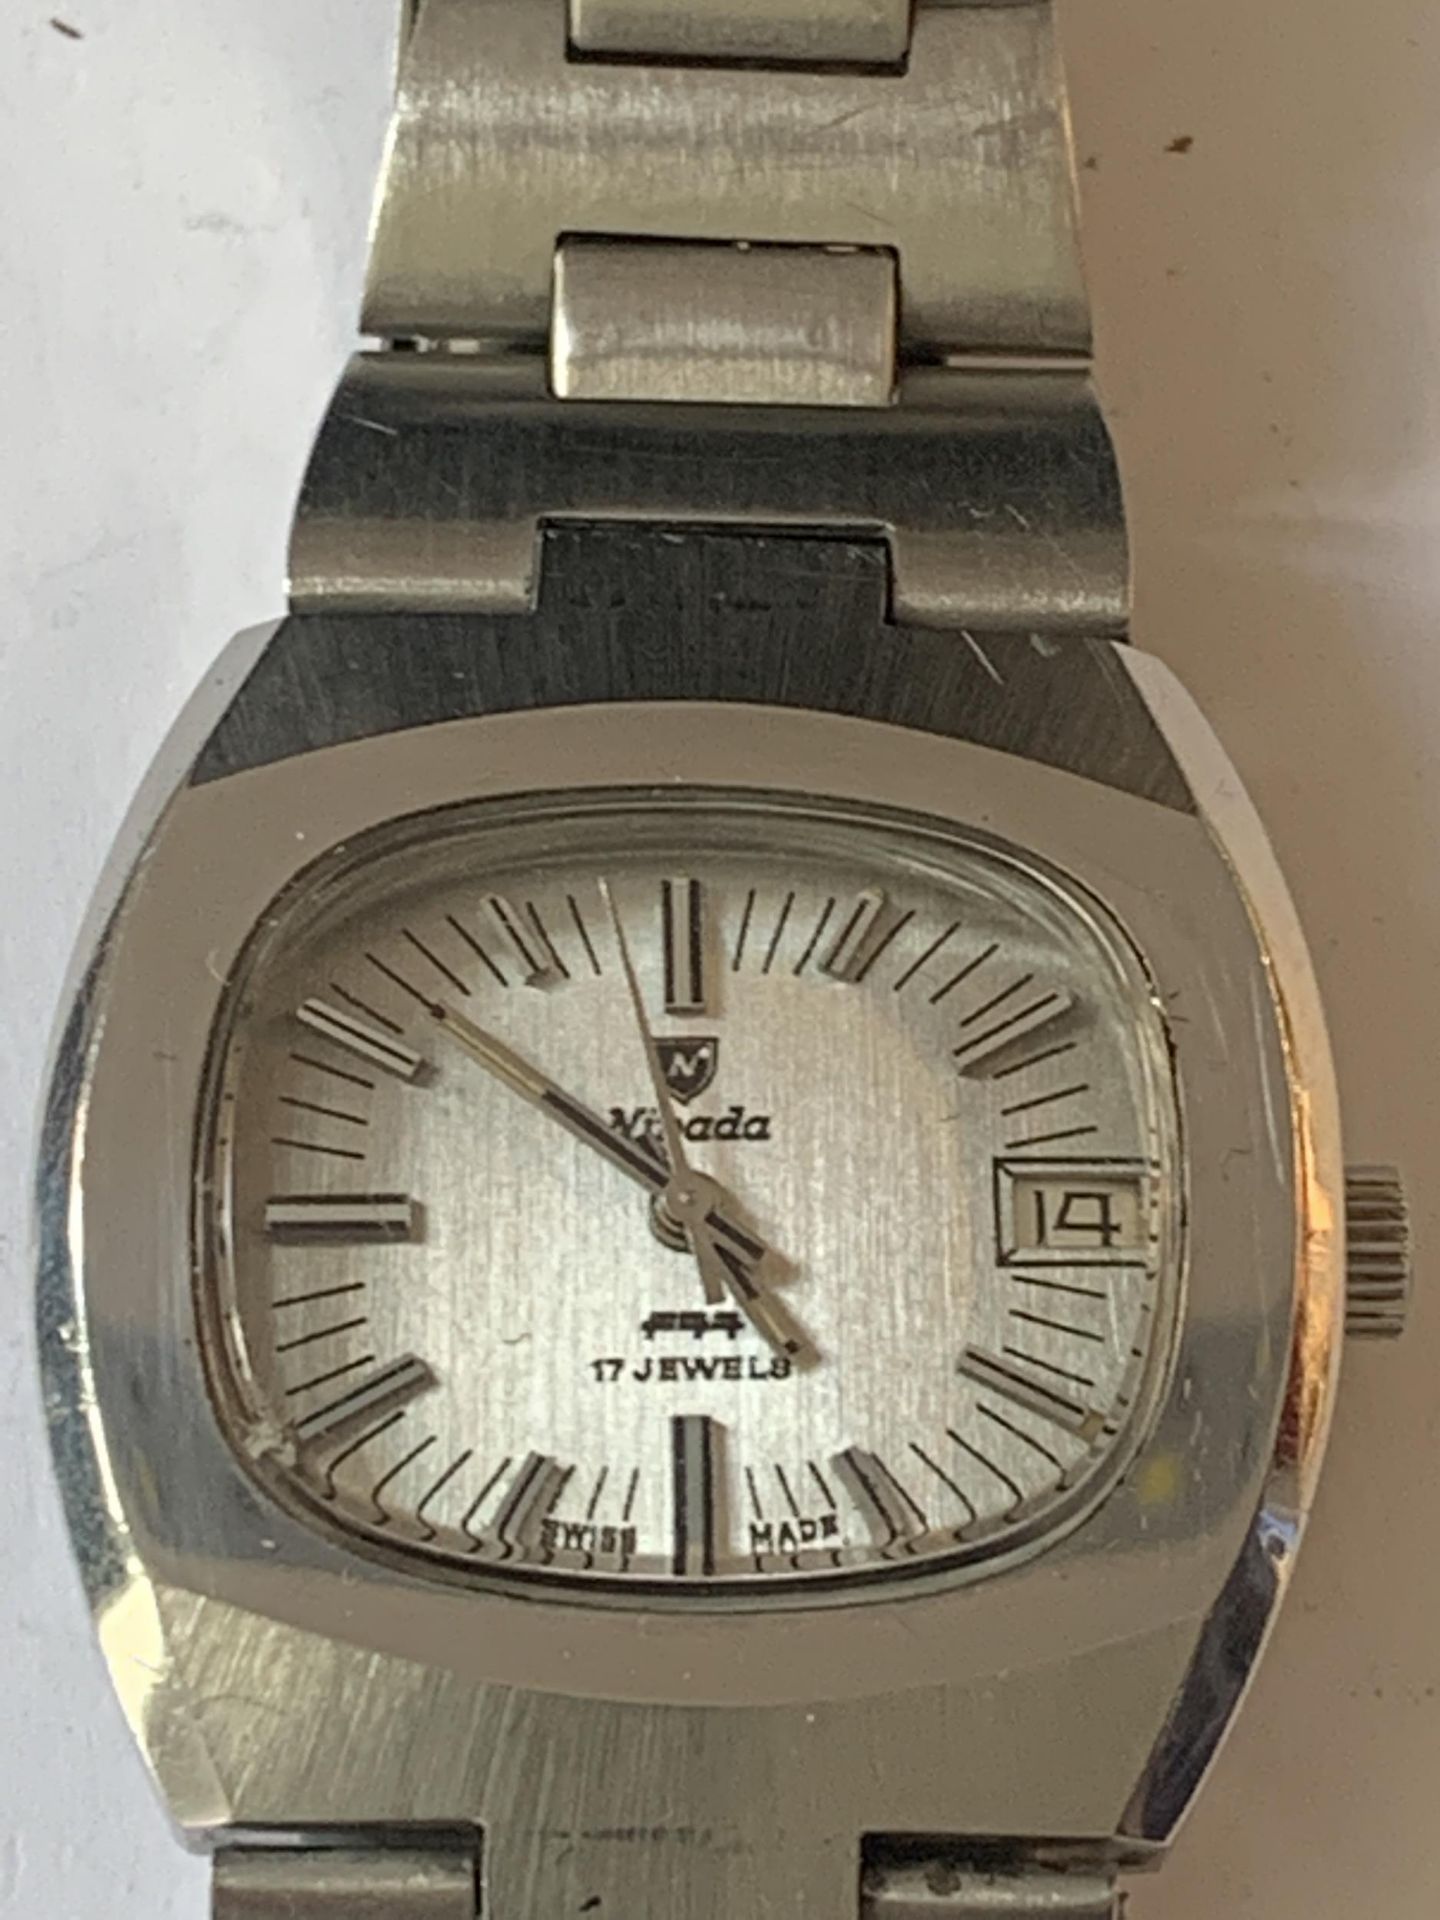 A VINTAGE NIVADA WRIST WATCH WITH ORIGINAL BRACELET. MANUAL SEEN WORKING BUT NO WARRANTY - Image 2 of 3